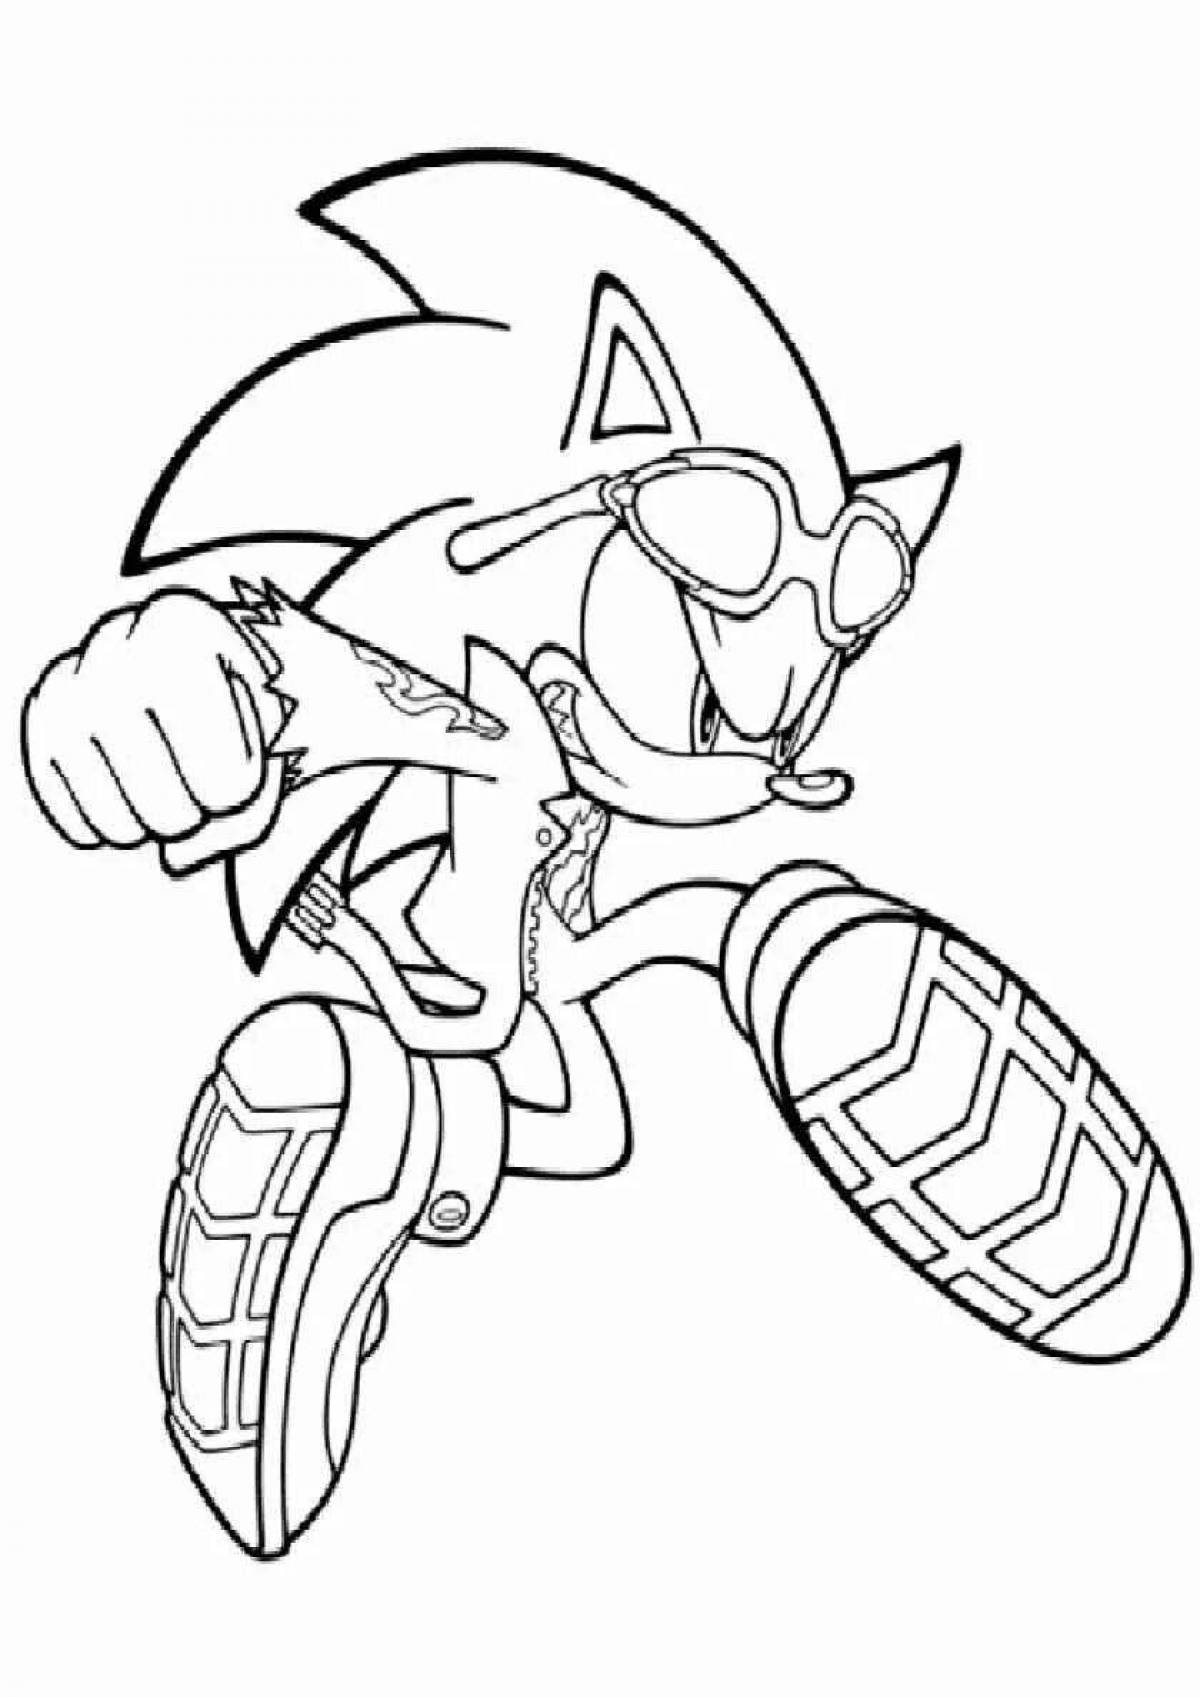 Colorful sonic virus coloring book